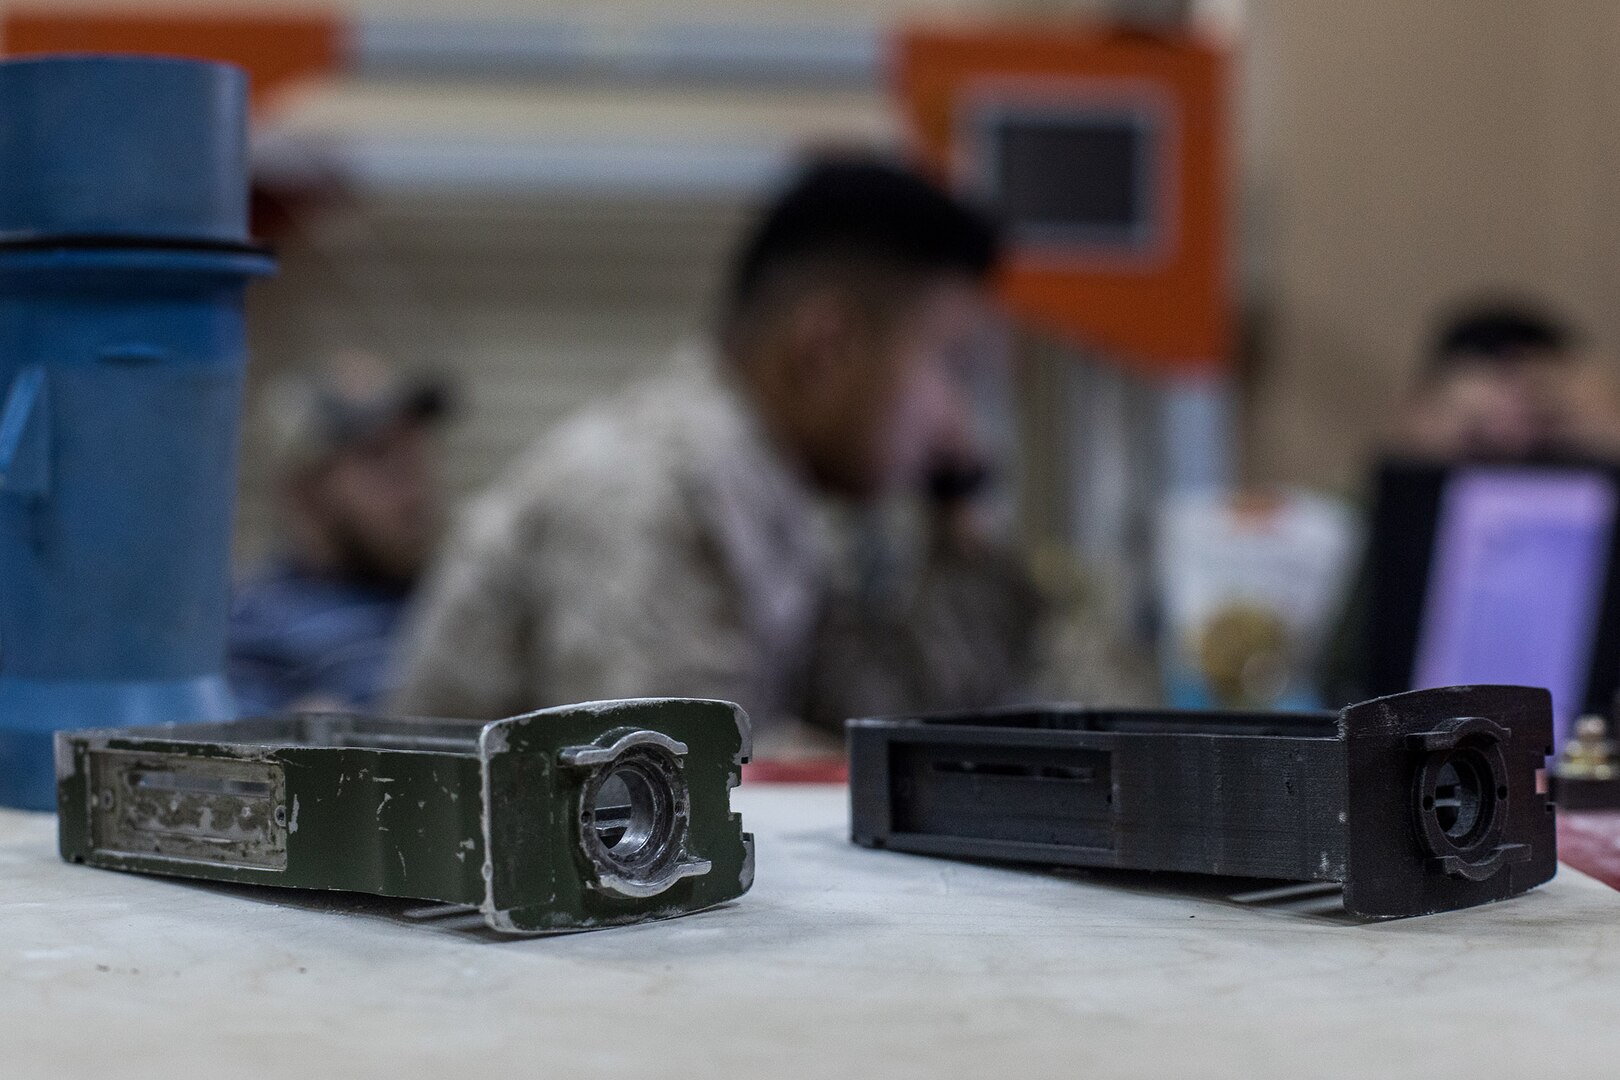 A U.S. Marine with Combat Logistics Battalion (CLB) 24, attached to Special Purpose Marine Air Ground Task Force-Crisis Response-Central Command, prepares to duplicate an Original Equipment Manufacturer (OEM) vehicle part for use within the battalion’s maintenance section in Kuwait, Aug. 28, 2019. A Marine Air Ground Task Force is specifically designed to be capable of deploying aviation, ground, and logistics forces forward at a moment’s notice.  (U.S. Marine Corps photo by Sgt. David Bickel)